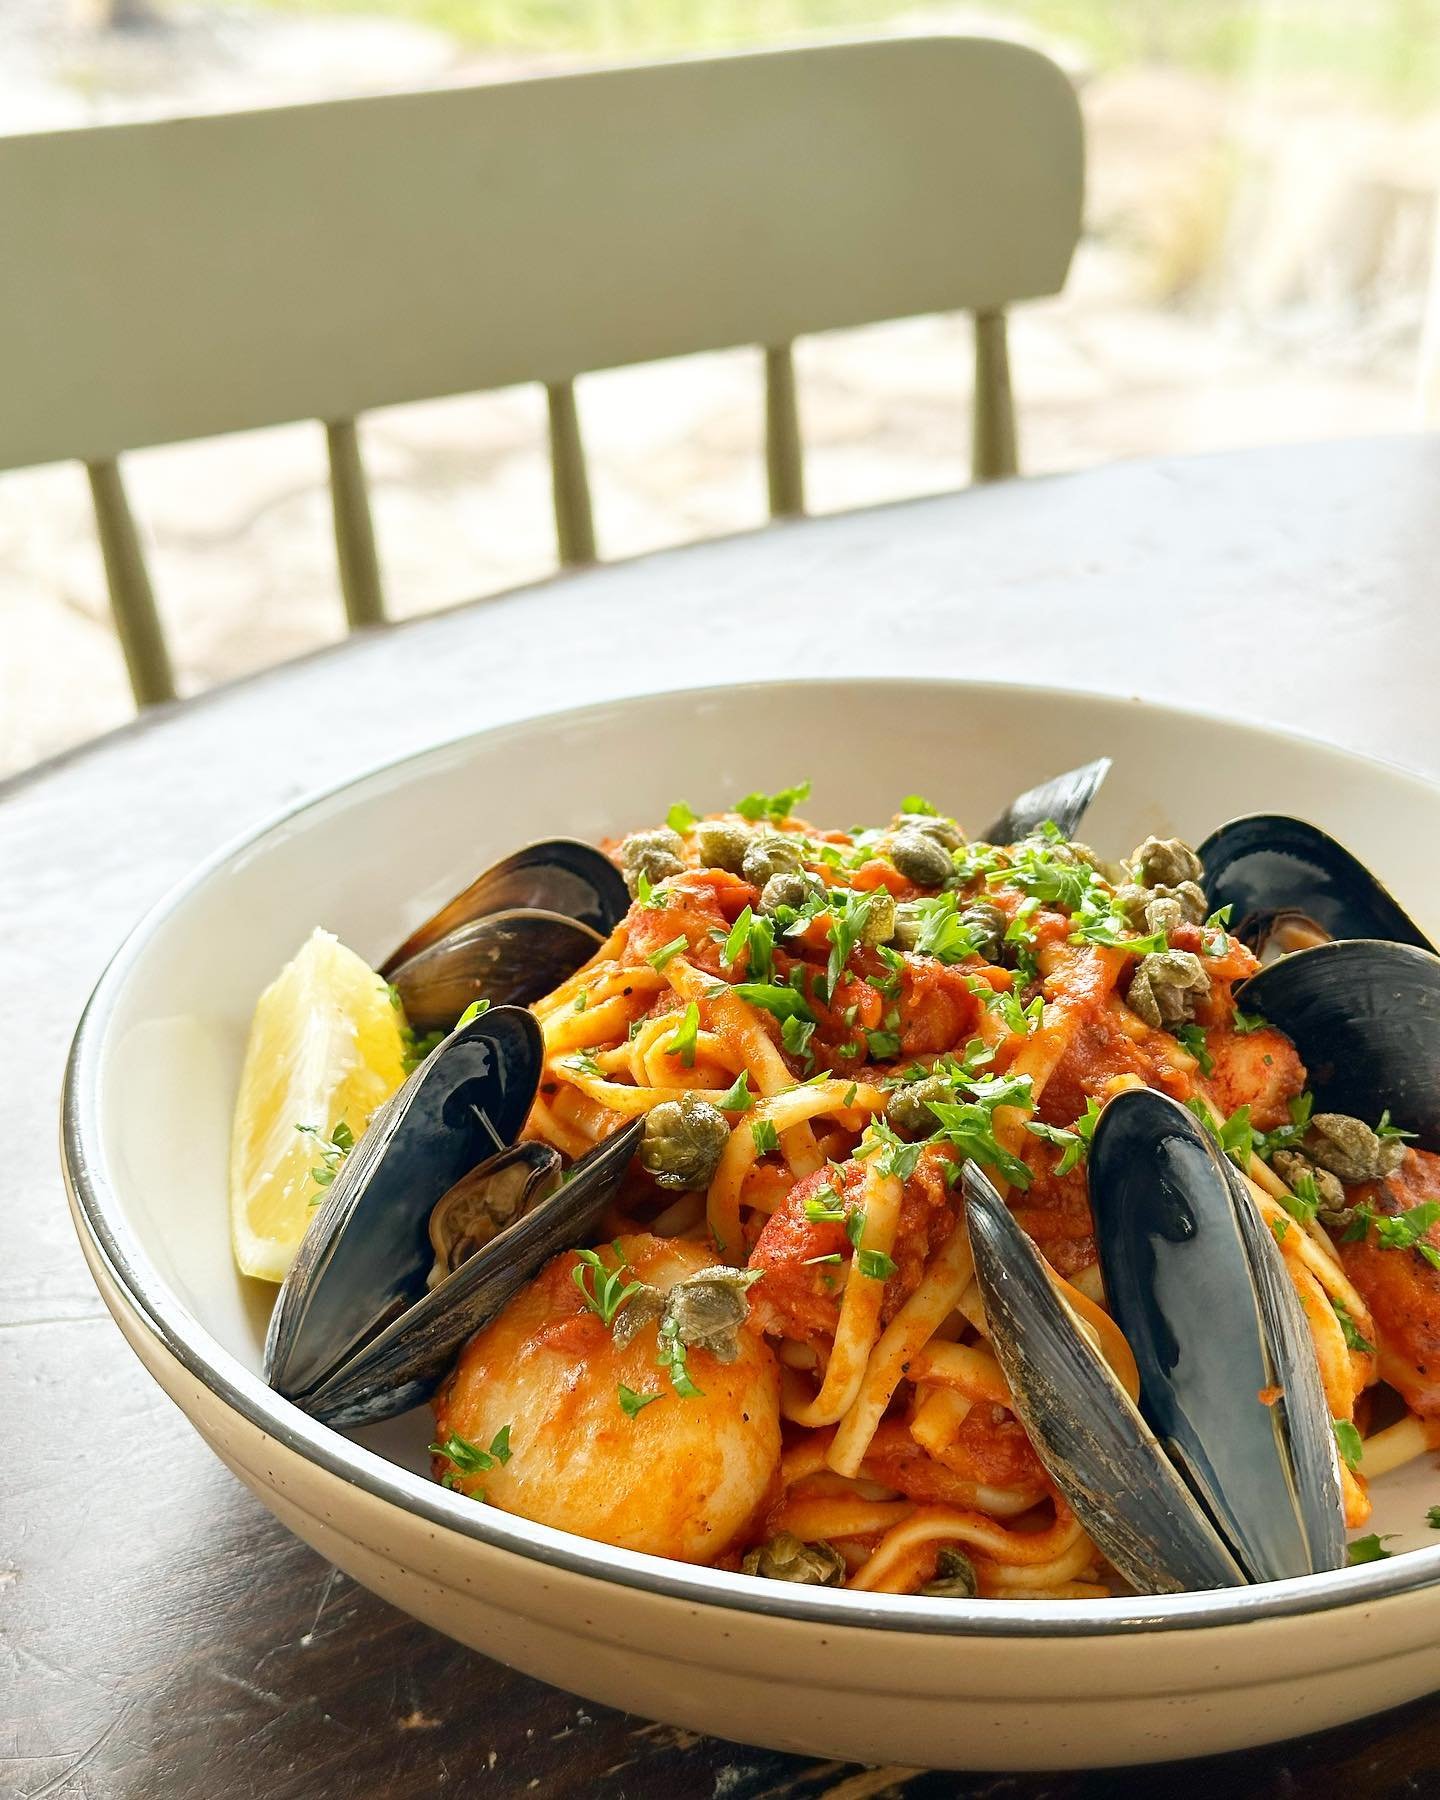 PSSSST! A few new items and some past faves are hitting our menu TONIGHT 🥳 Seafood Linguine anyone? Check out our offerings at www.labri.cafe or the link in our bio 🌼

Our full summer menu launches May 24th &mdash; make your reservations now!